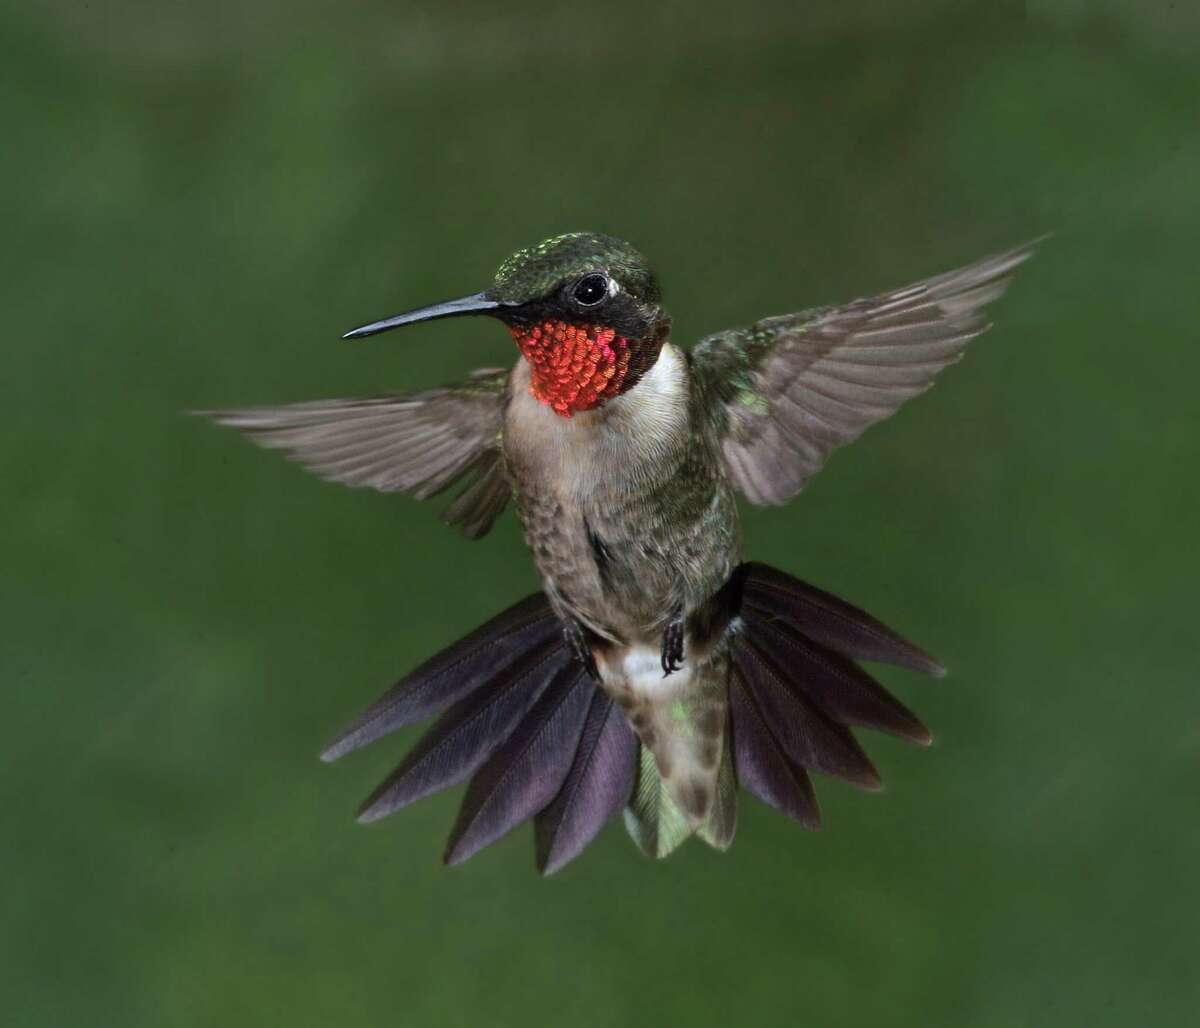 The coastal towns of Rockport and Fulton celebrate the spectacular fall migration of ruby-throated hummingbirds and others.